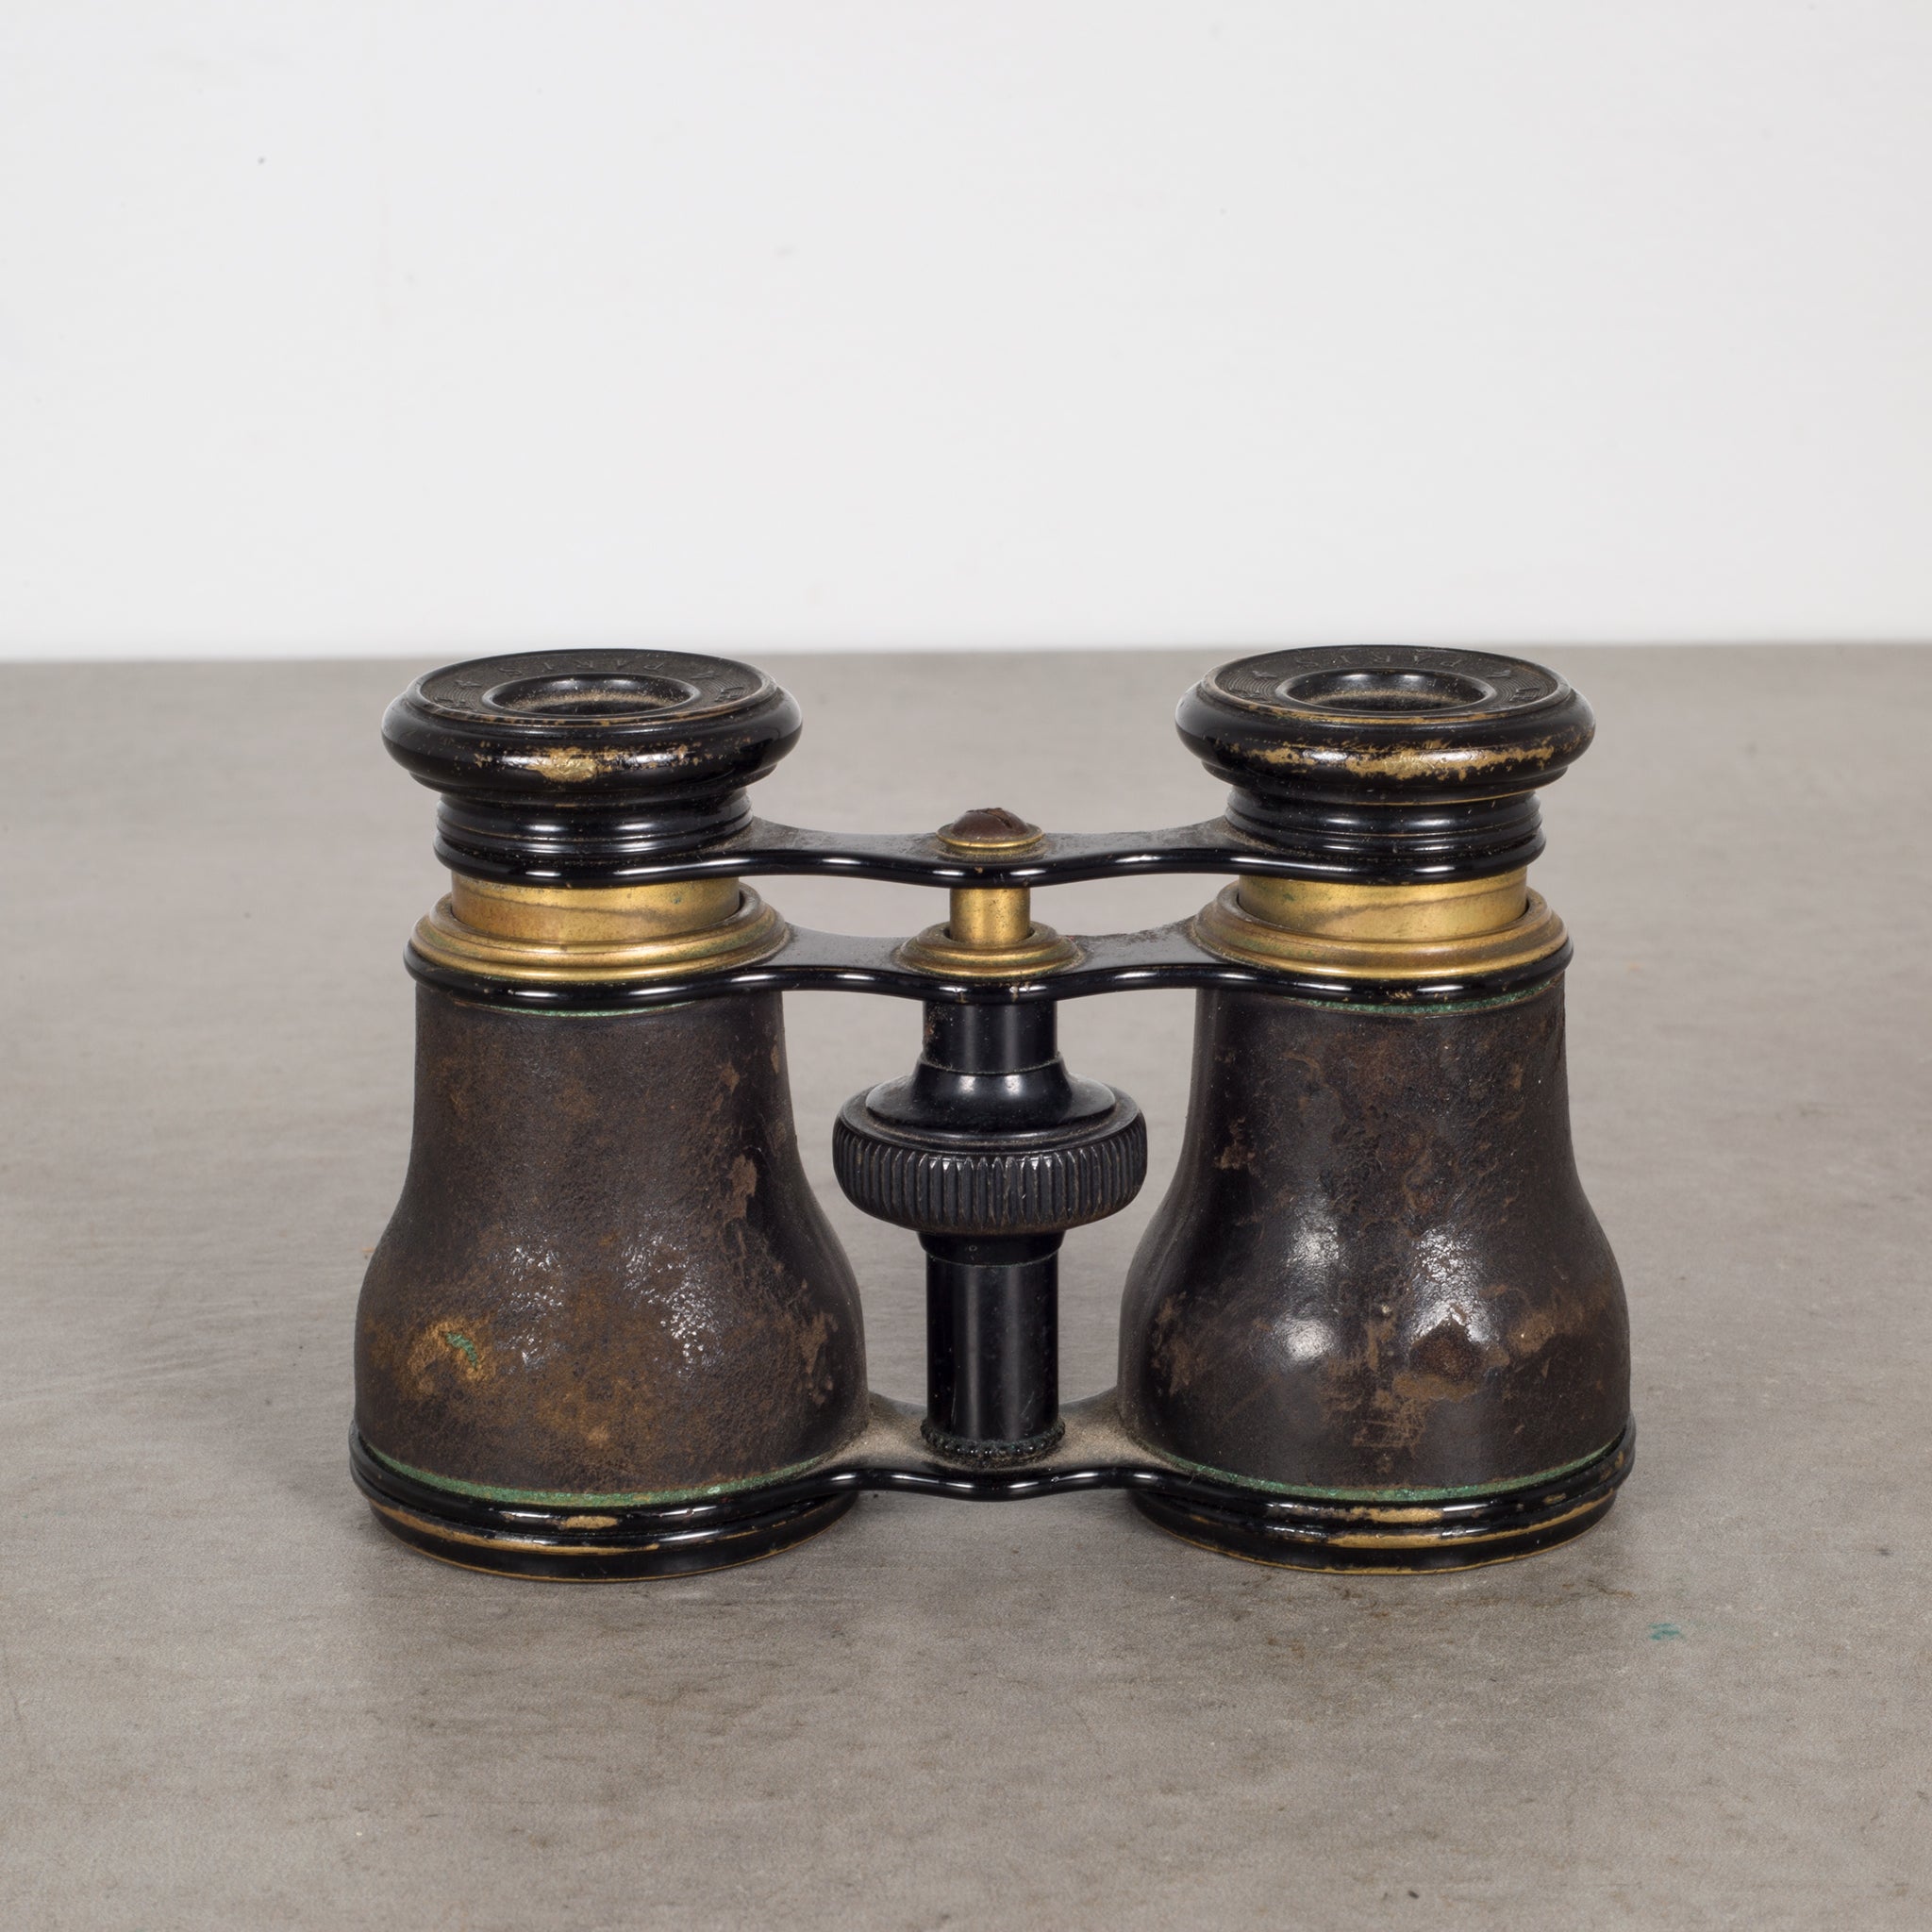 French Leather/Brass Opera Glasses by Le Maire Fabt. Paris c.1880 – S16 ...